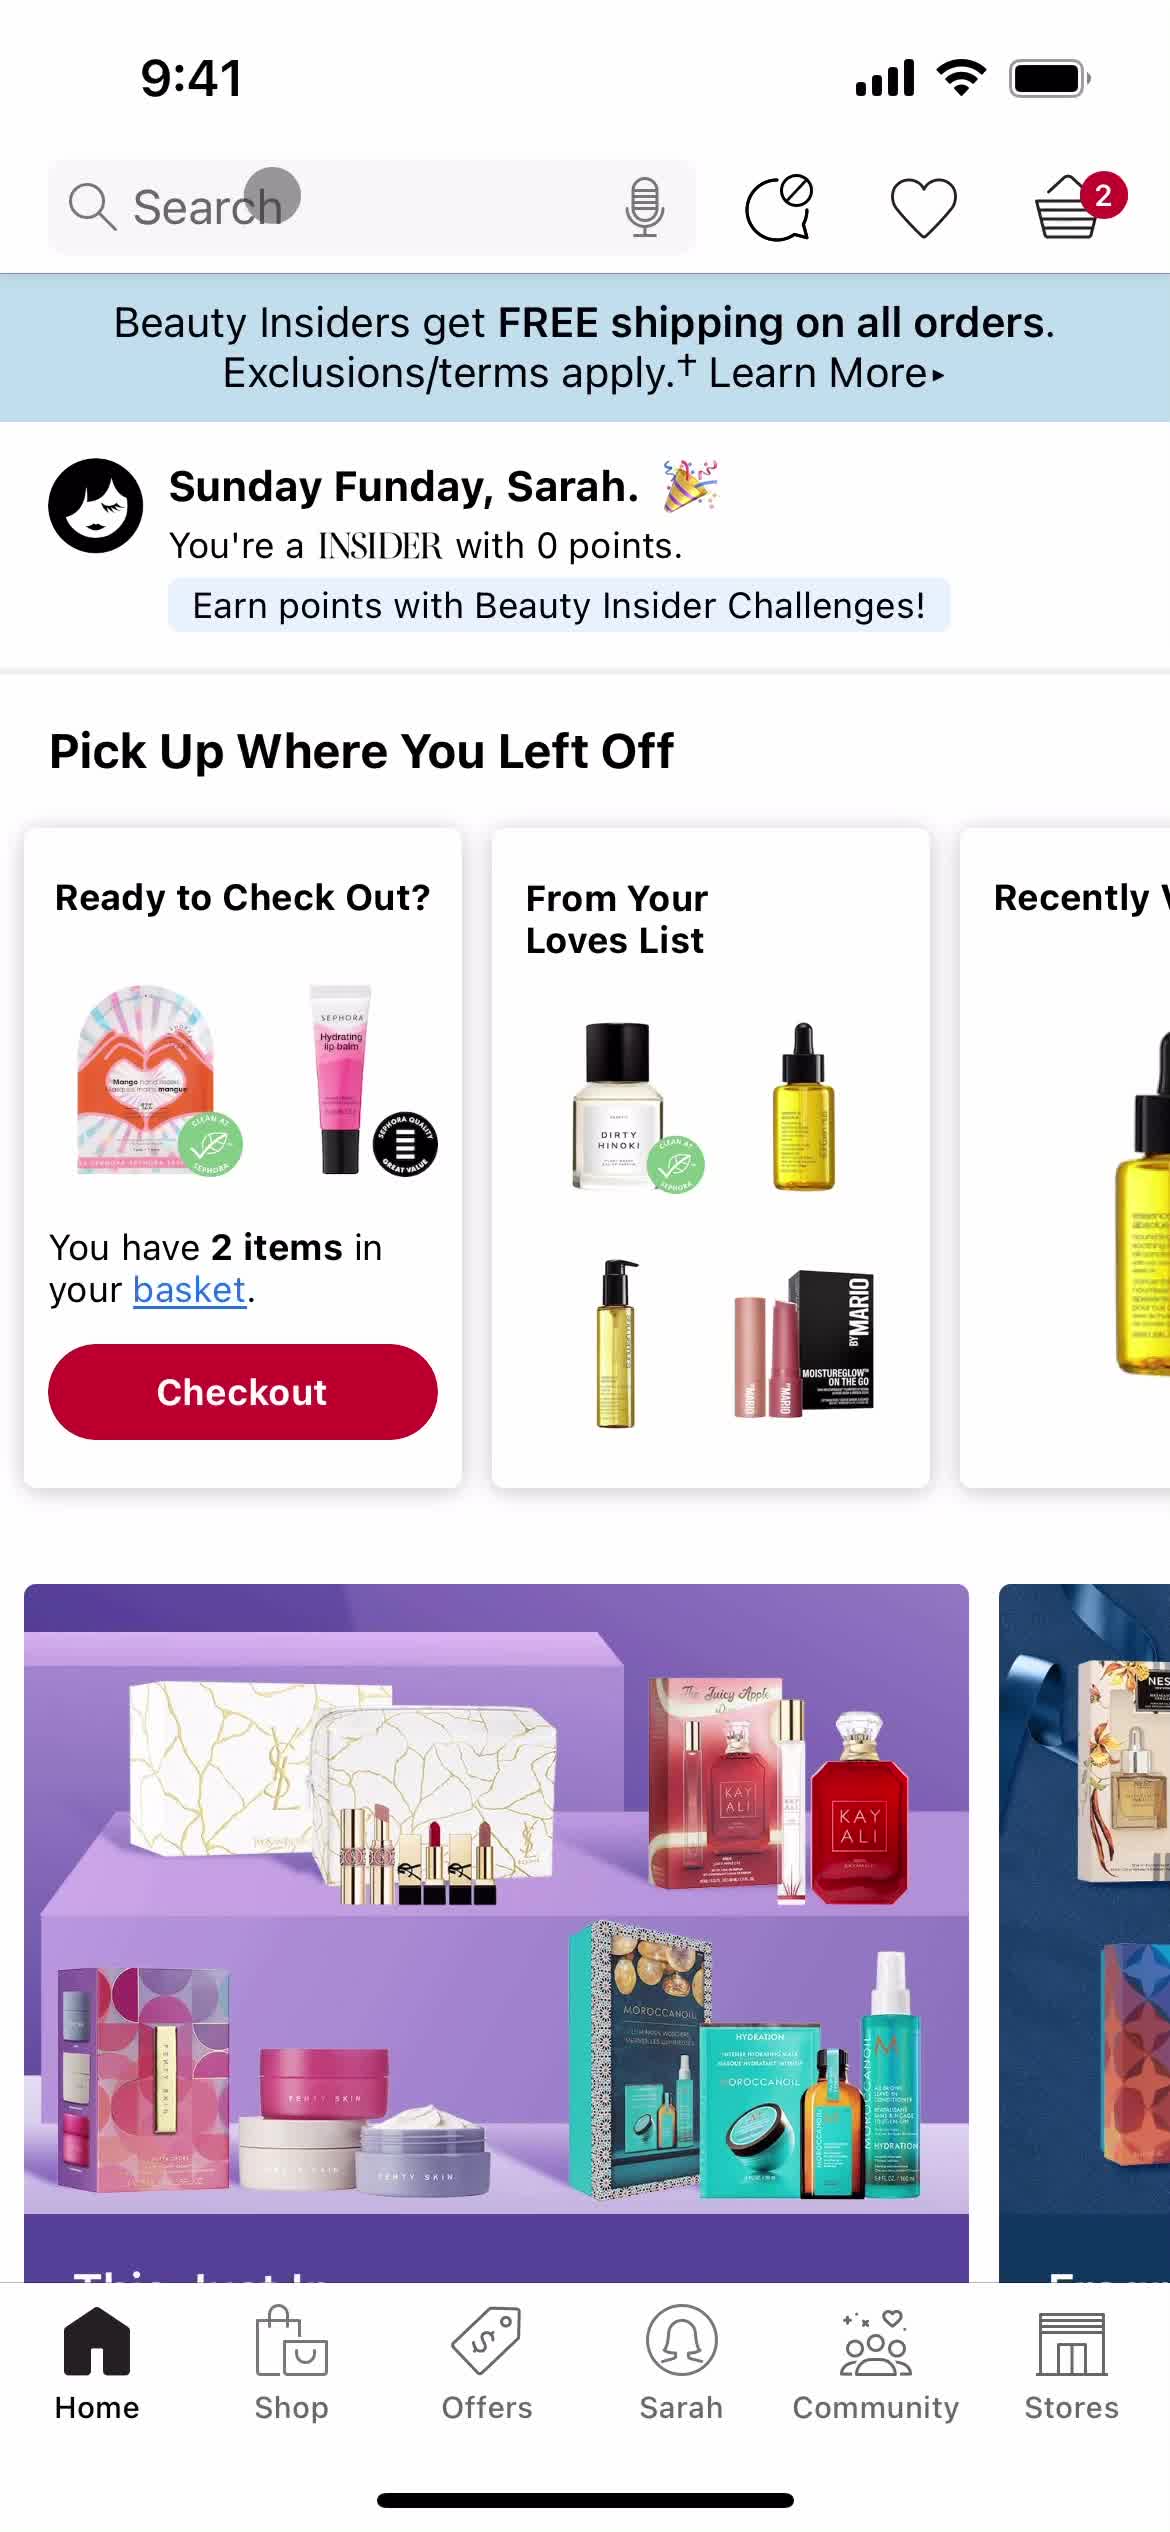 Screenshot of Home on Searching on Sephora user flow